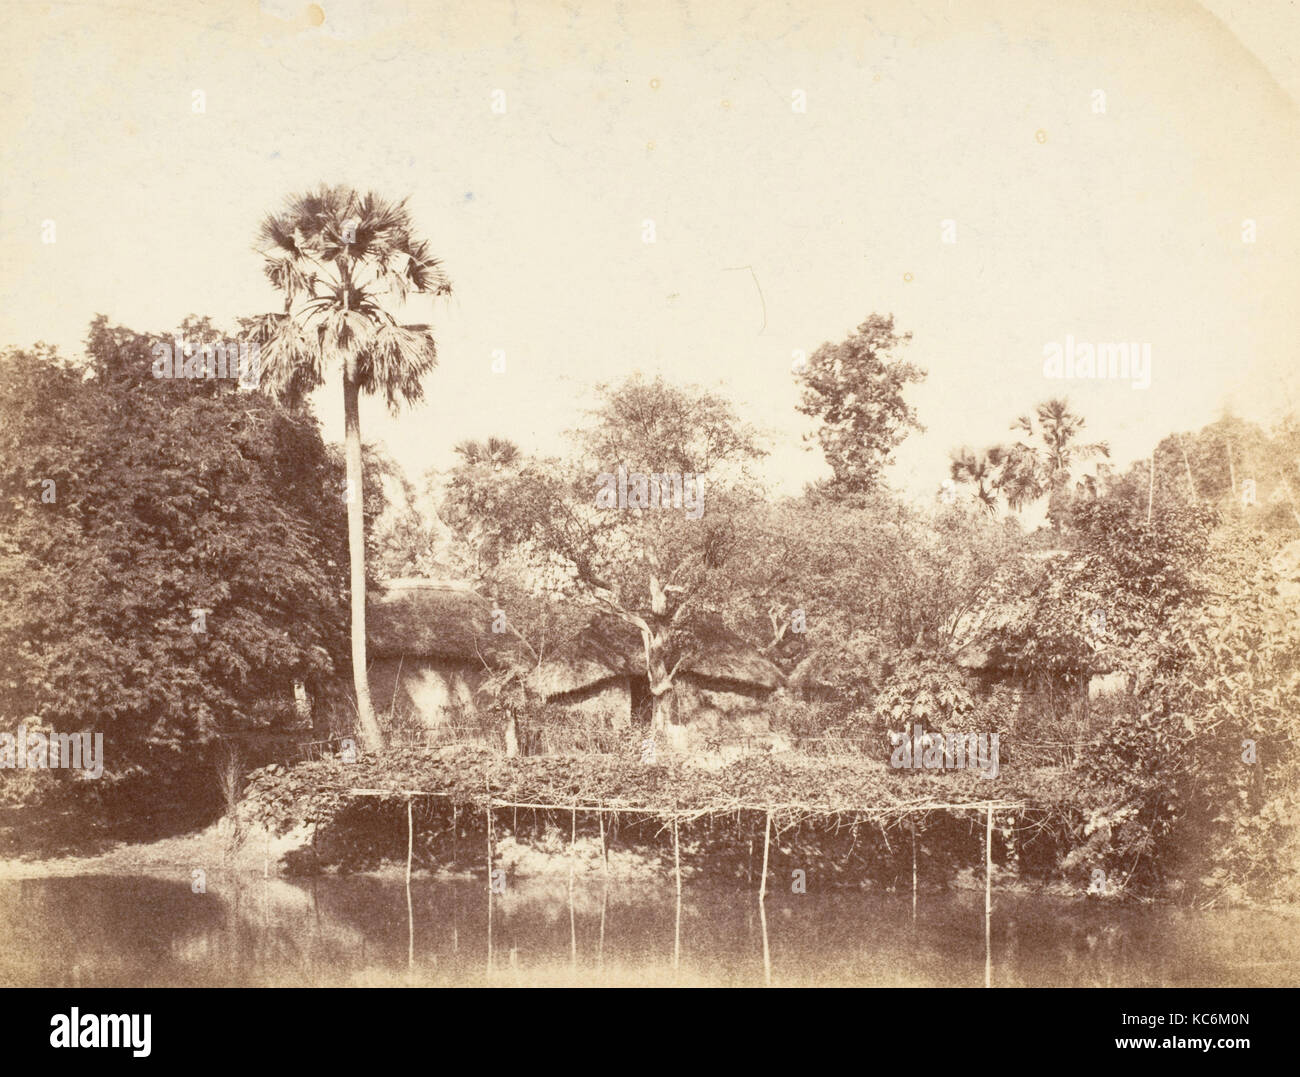 View of the Jungle, Bengal, Captain R. B. Hill, 1850s Stock Photo